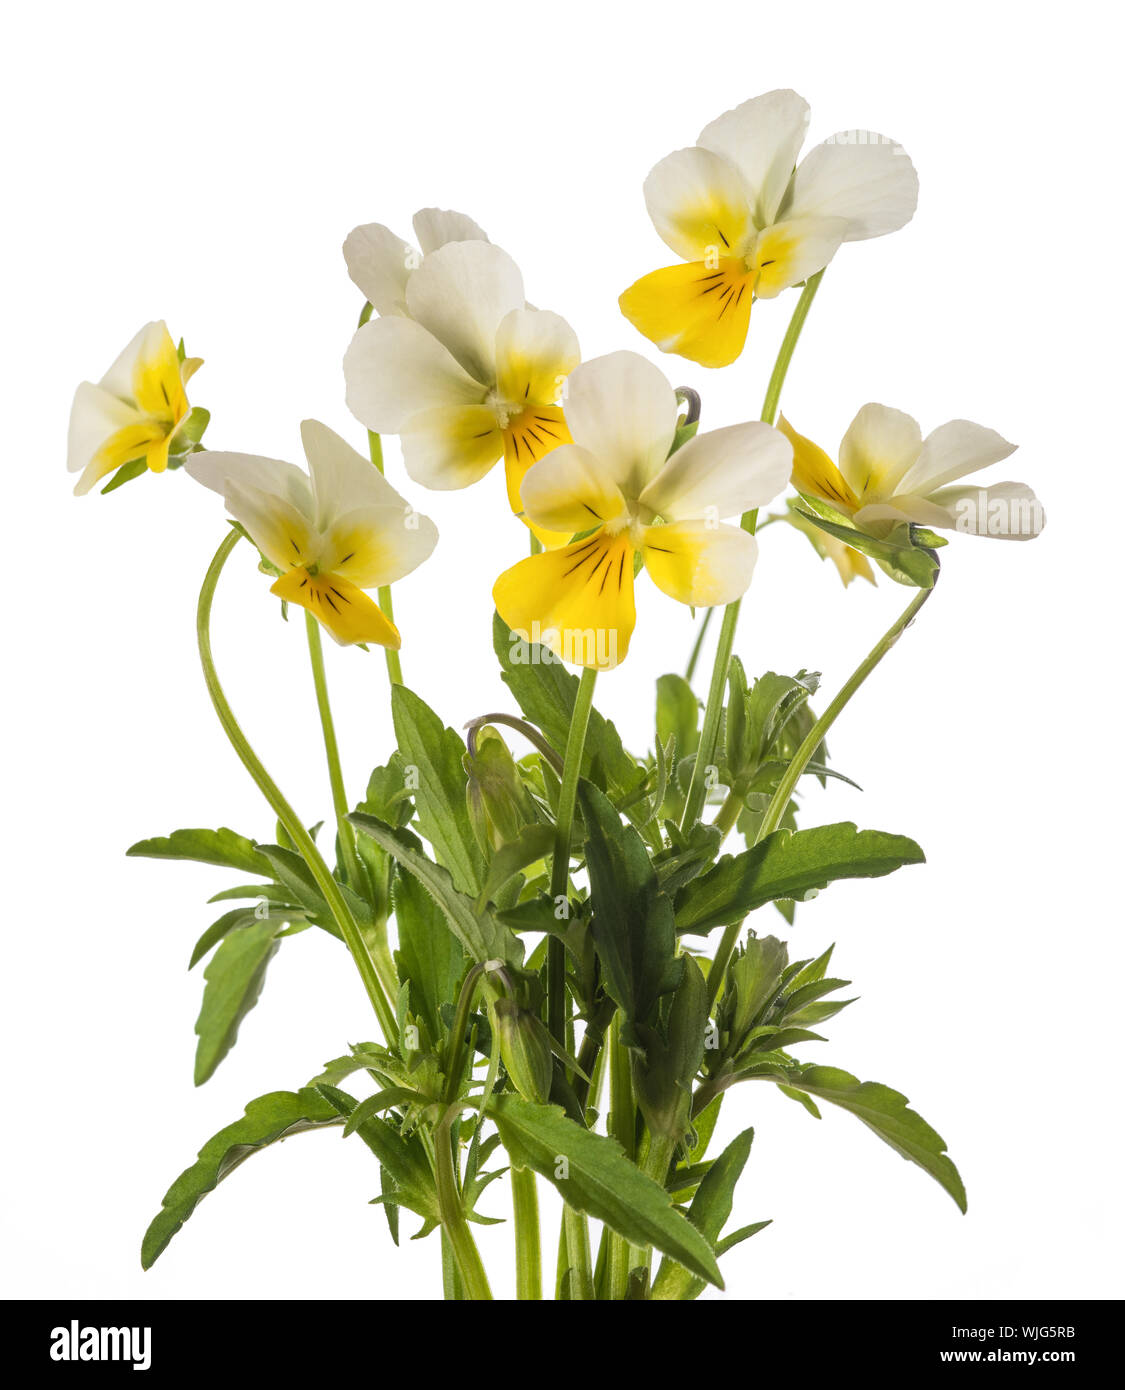 pansy flowers bunch isolated on white background Stock Photo